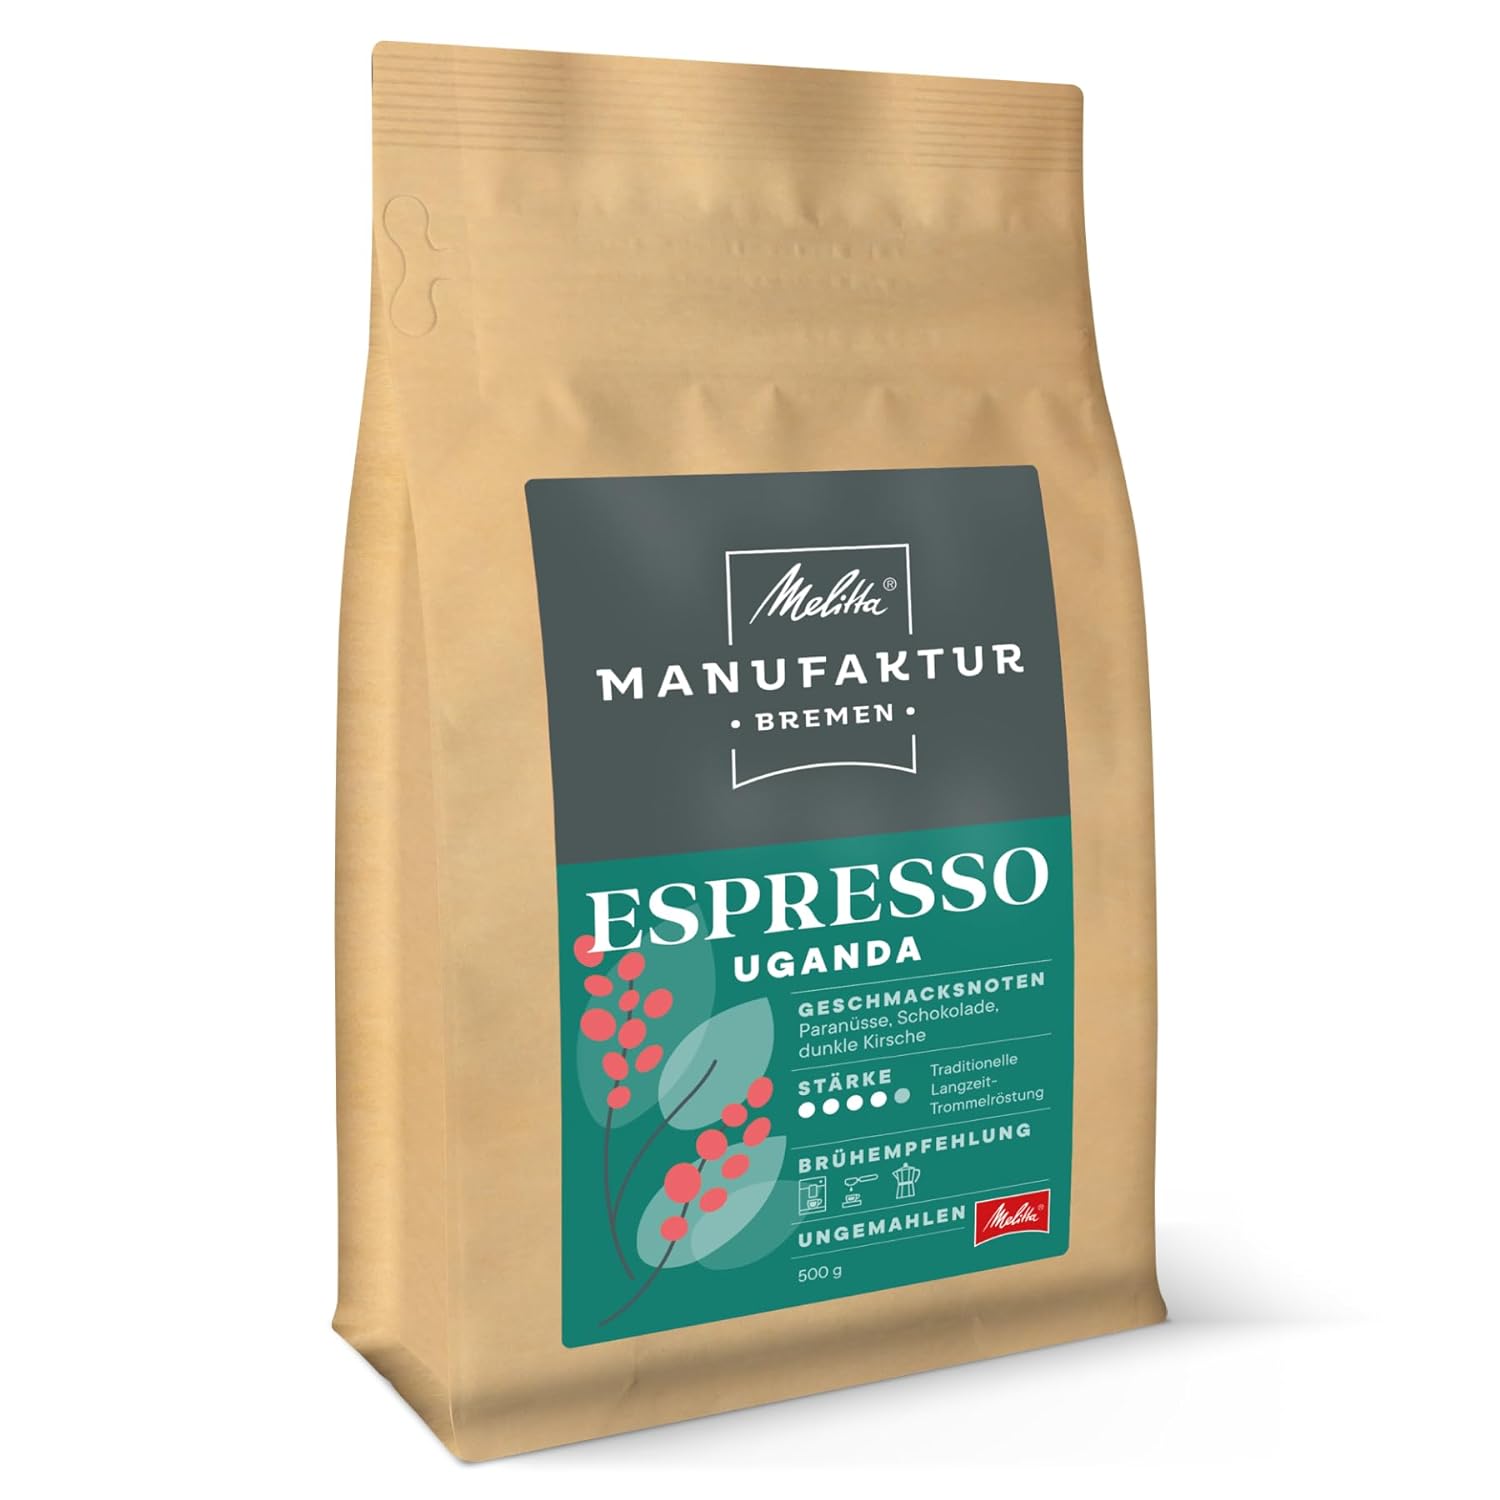 Melitta Manufacture Coffee Espresso Specialty Coffee, 500 g, Whole Coffee Beans, Unground, Single Origin Farm Coffee from Uganda, Roasted in Germany, Strength 4